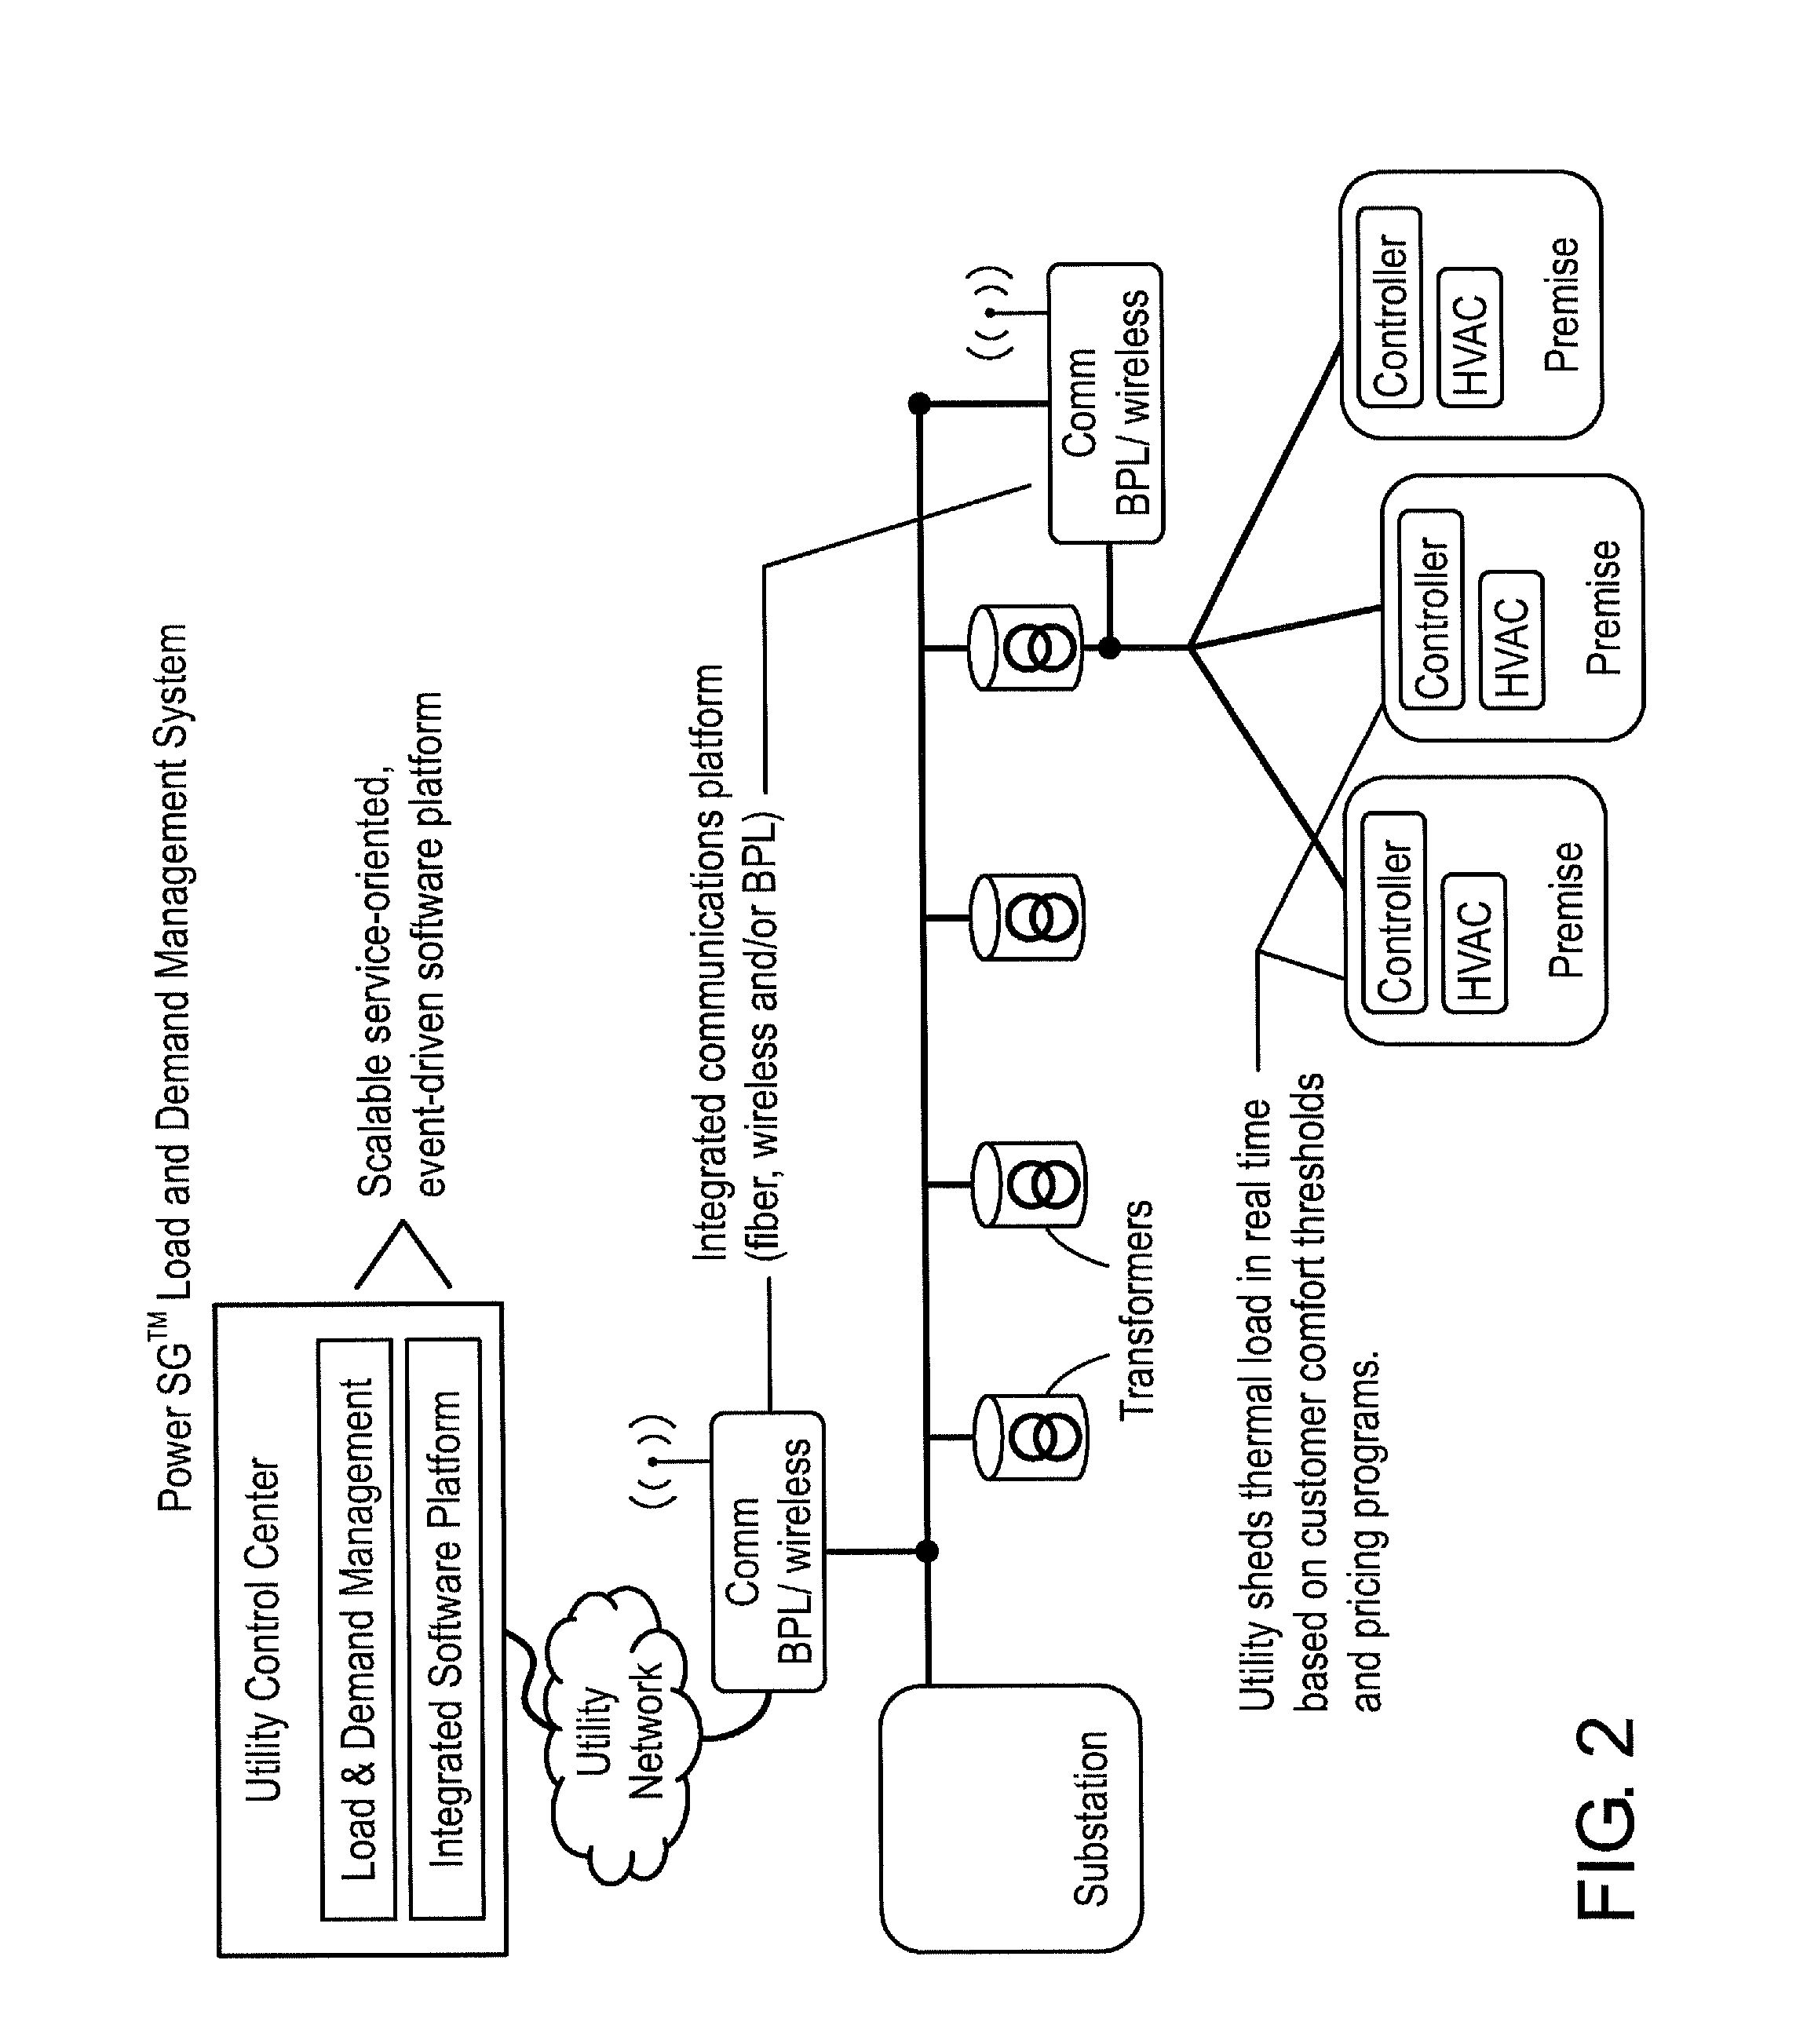 System and method for demand dispatch and load management